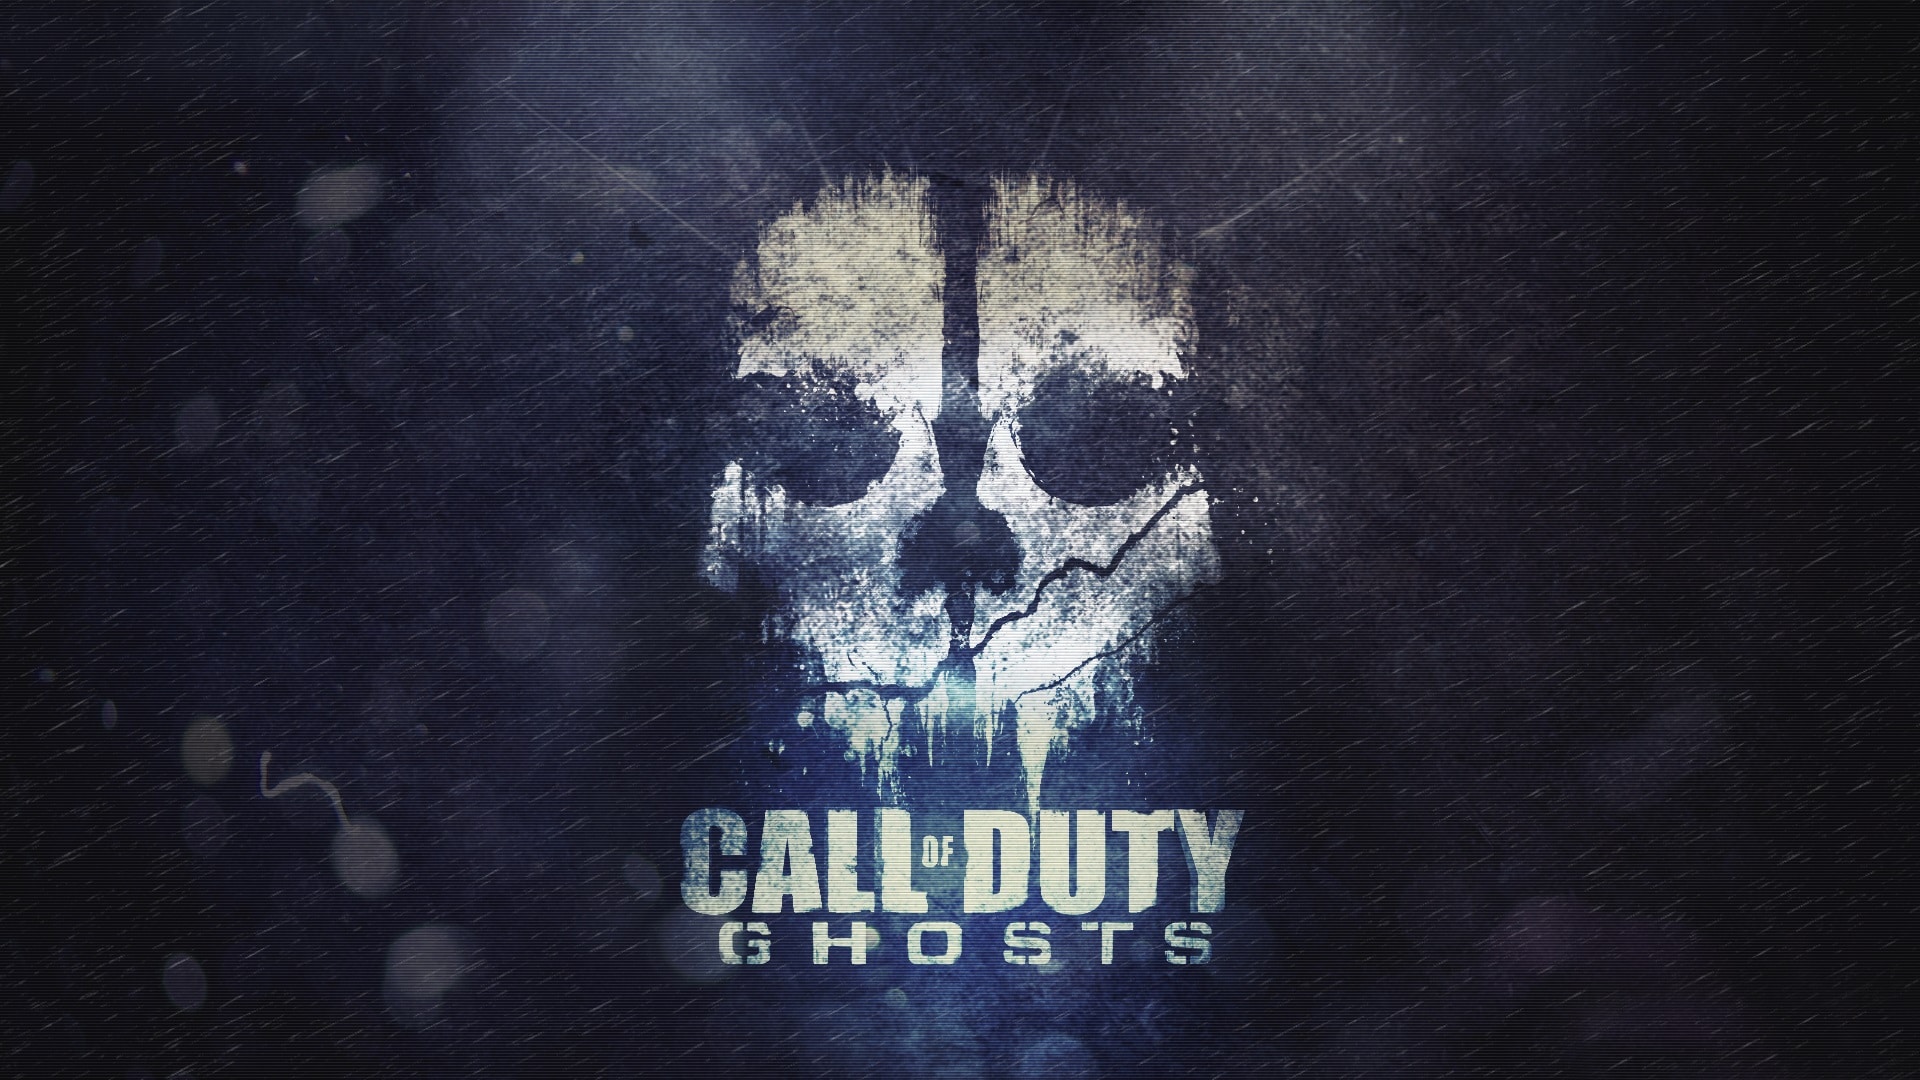 Call of Duty Ghosts 2, Infitity Ward, Call of Duty, Ghost 2, Ashton Williams